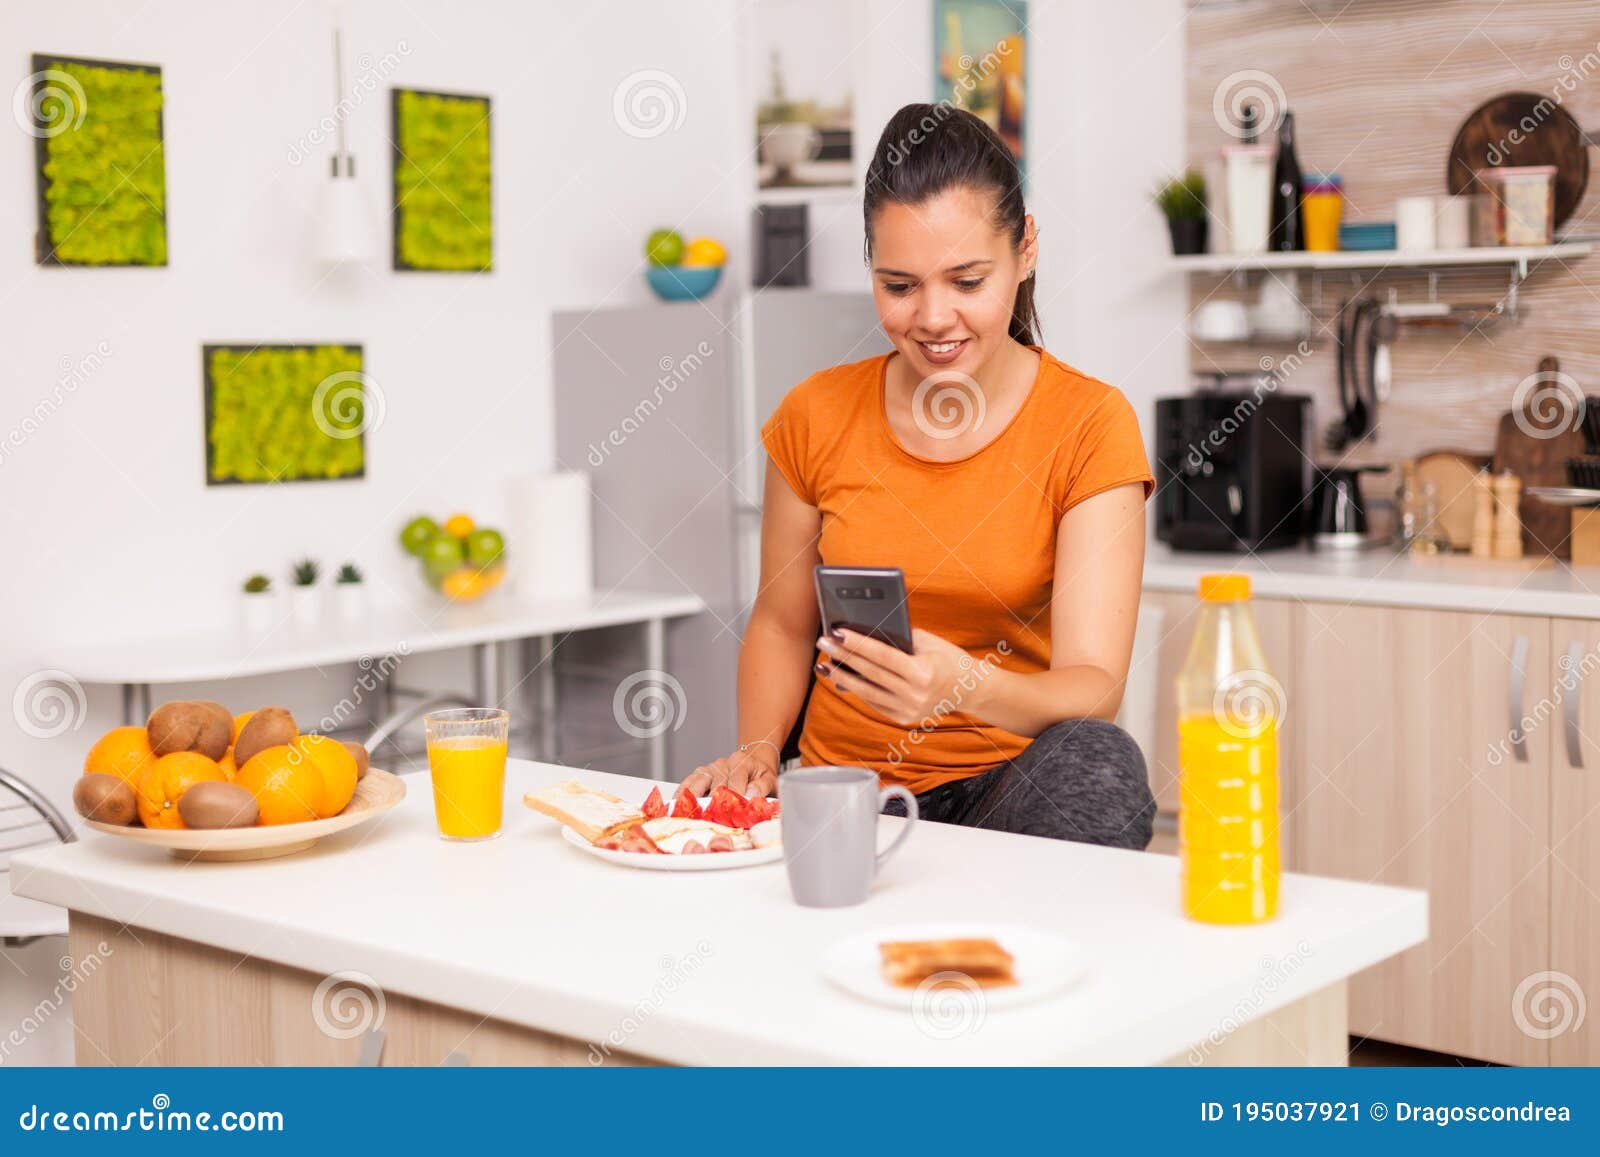 Speaking on in the Stock Image - Image of apartment, lifestyle: 195037921